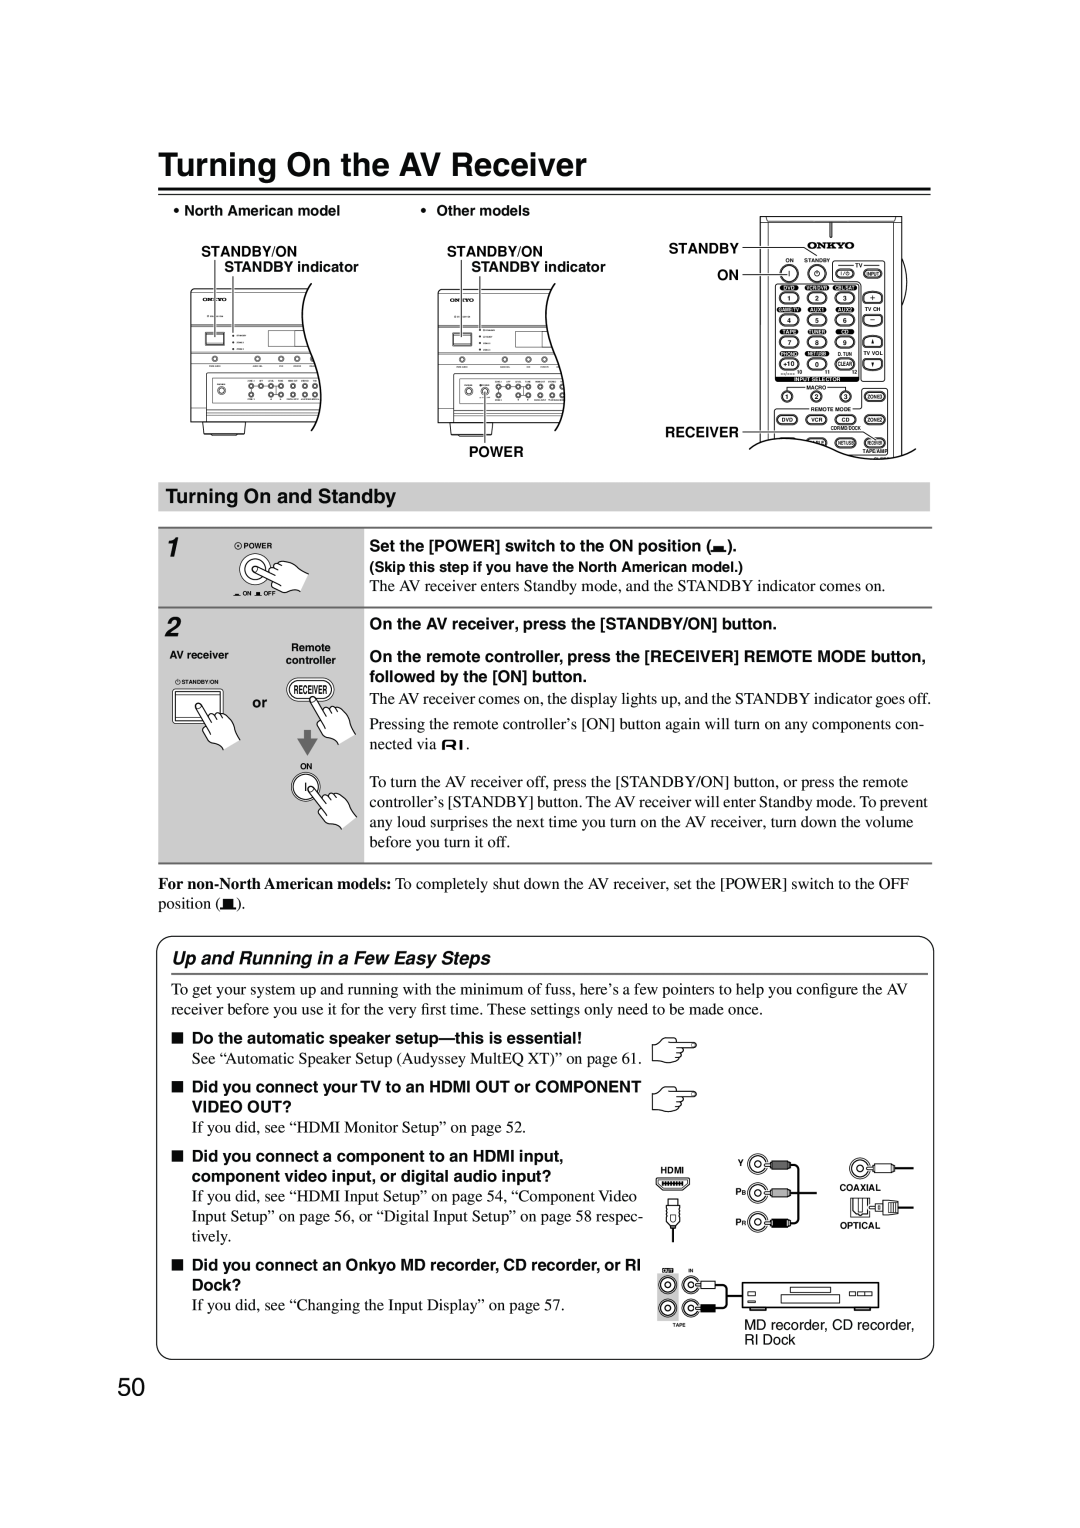 Onkyo TX-NR905 instruction manual Turning On the AV Receiver, Turning On and Standby, Up and Running in a Few Easy Steps 